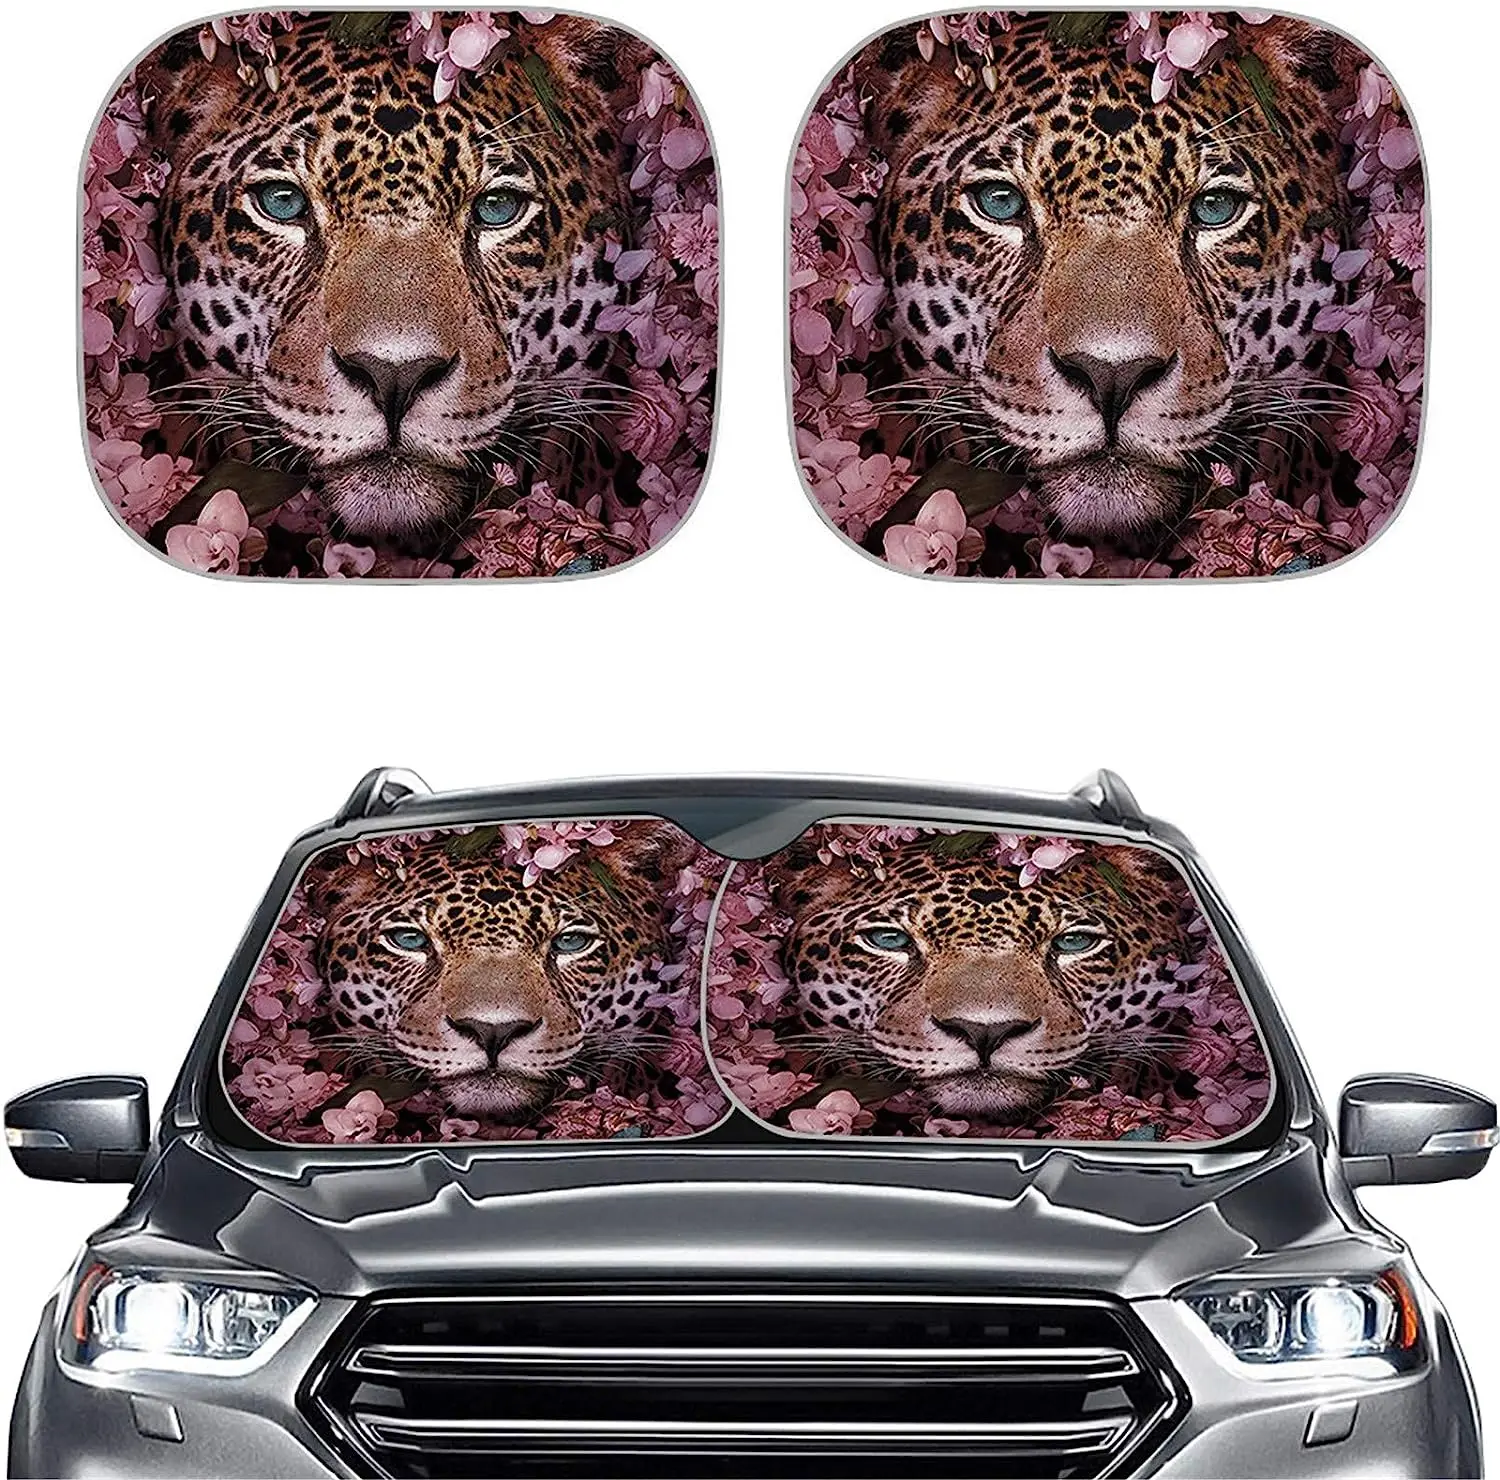 

Leopard Cherry Blossom Windshield Sunshade Polyester Blocks Heat and Sun Foldable Sun Shield Keeps Your Vehicle Cool Leapoard